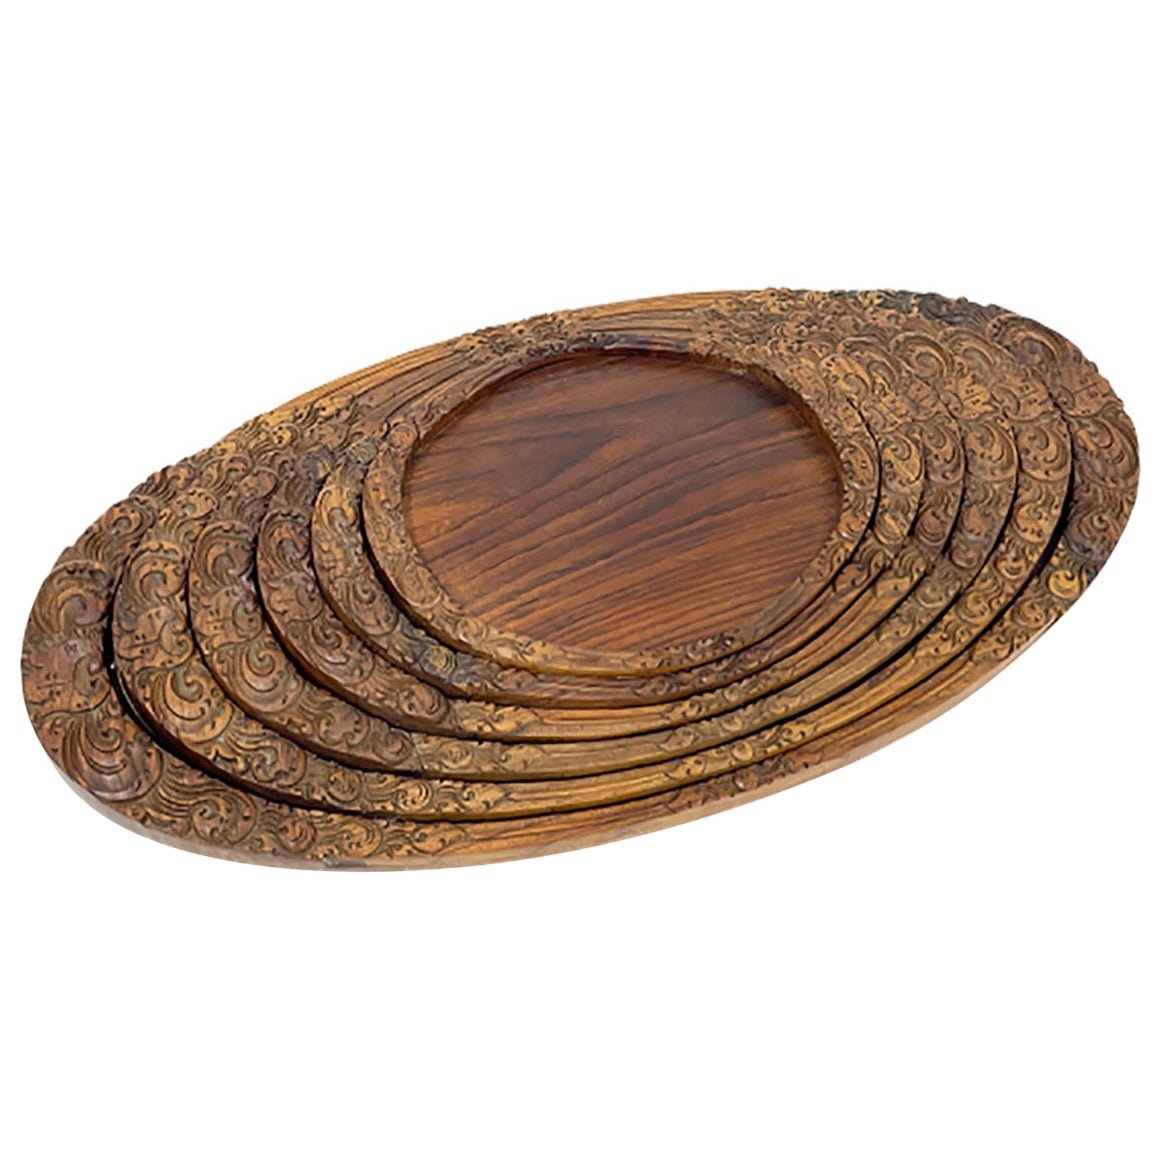 Fair Trade Indonesian Wooden Dinner Serving Plates choose from selection 